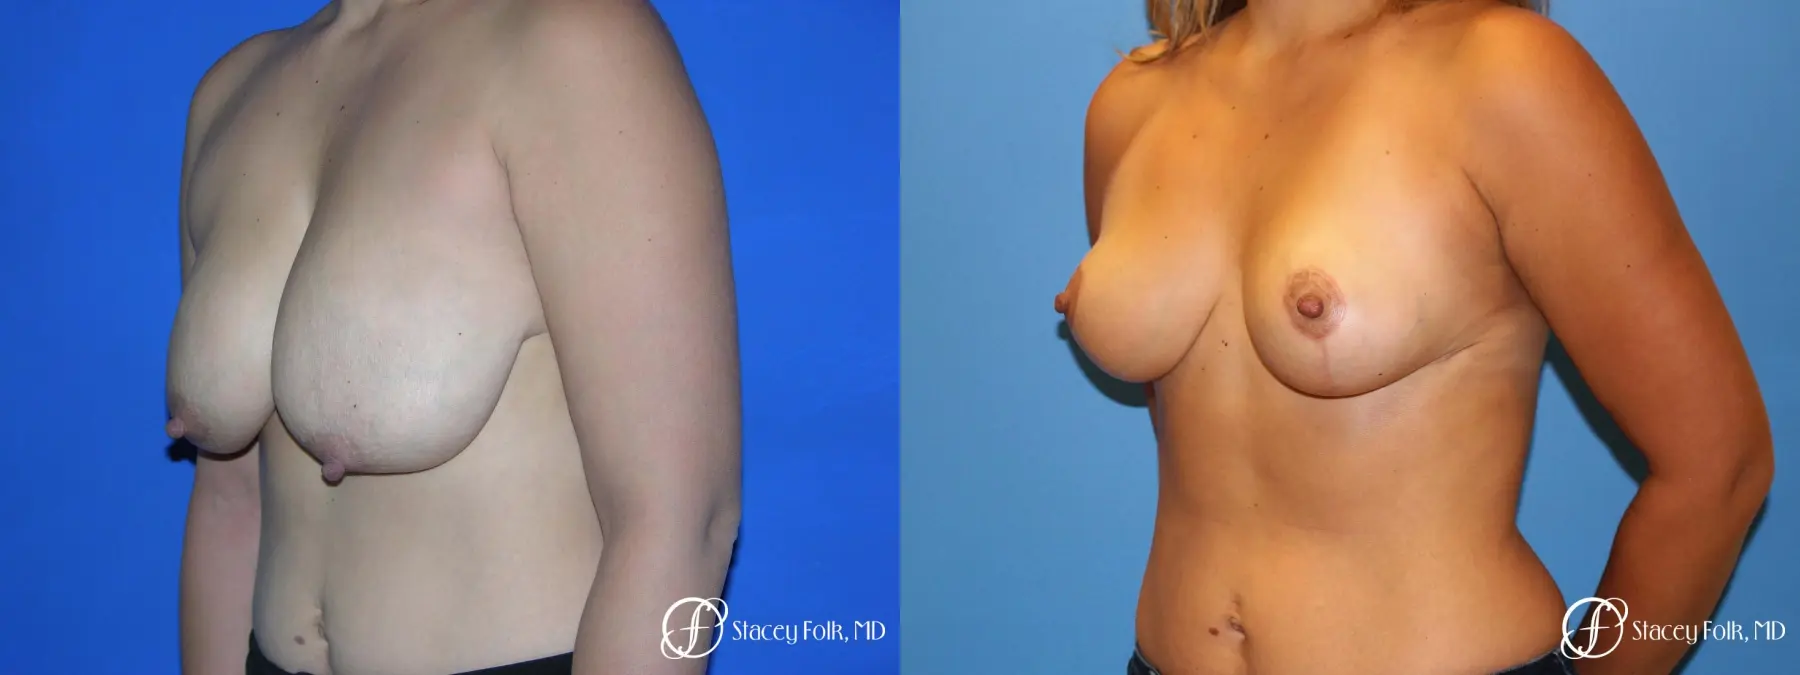 Denver Breast reduction 5842 - Before and After 2